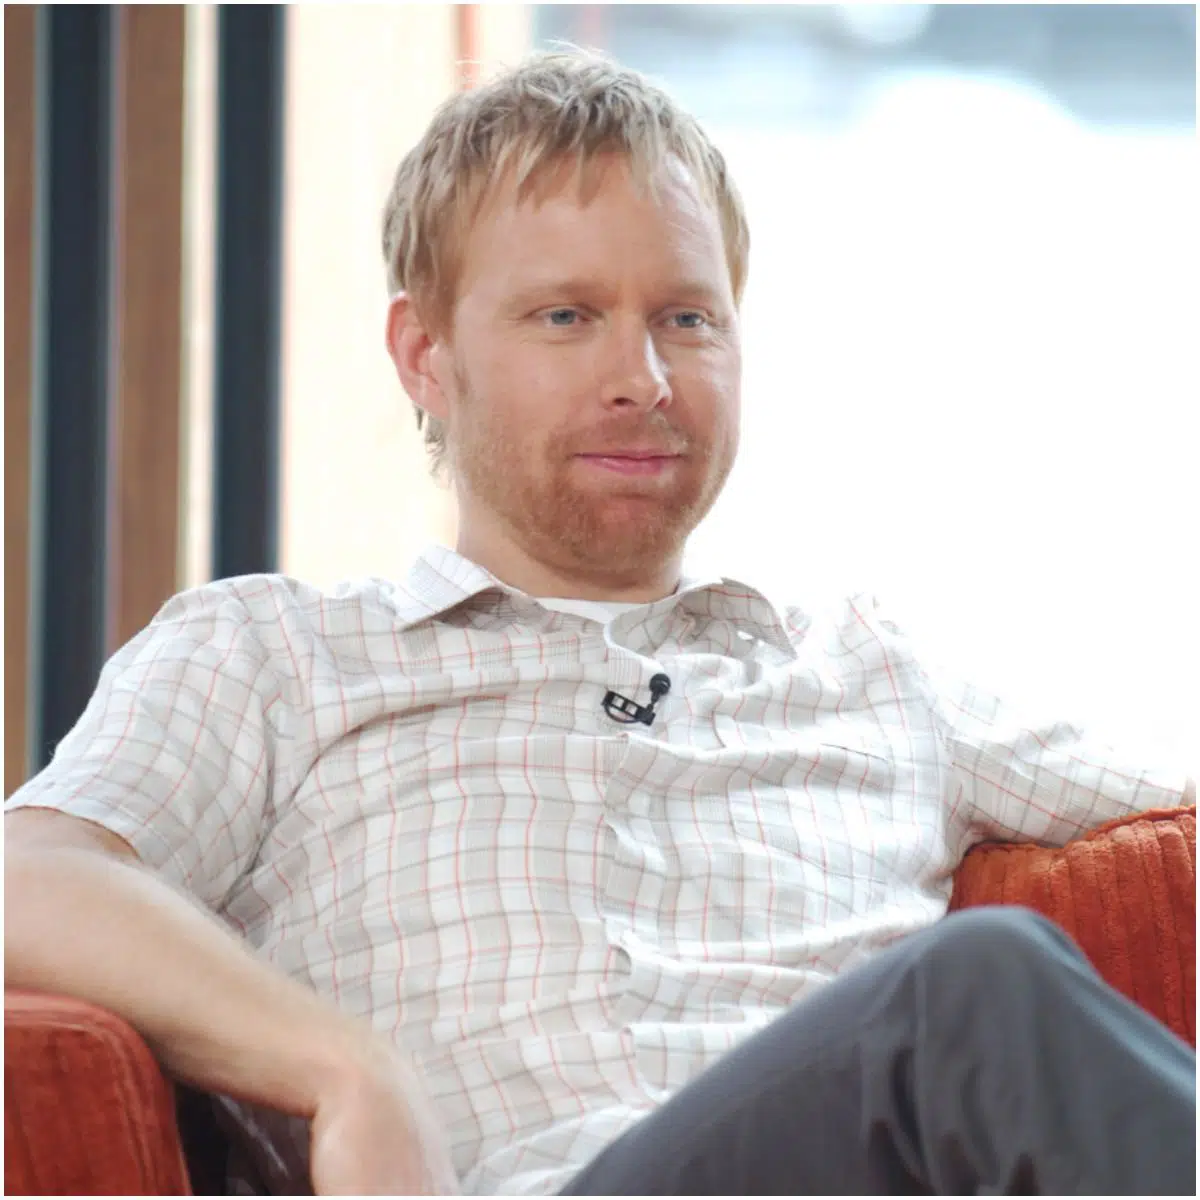 what is the net worth of Nate Mendel